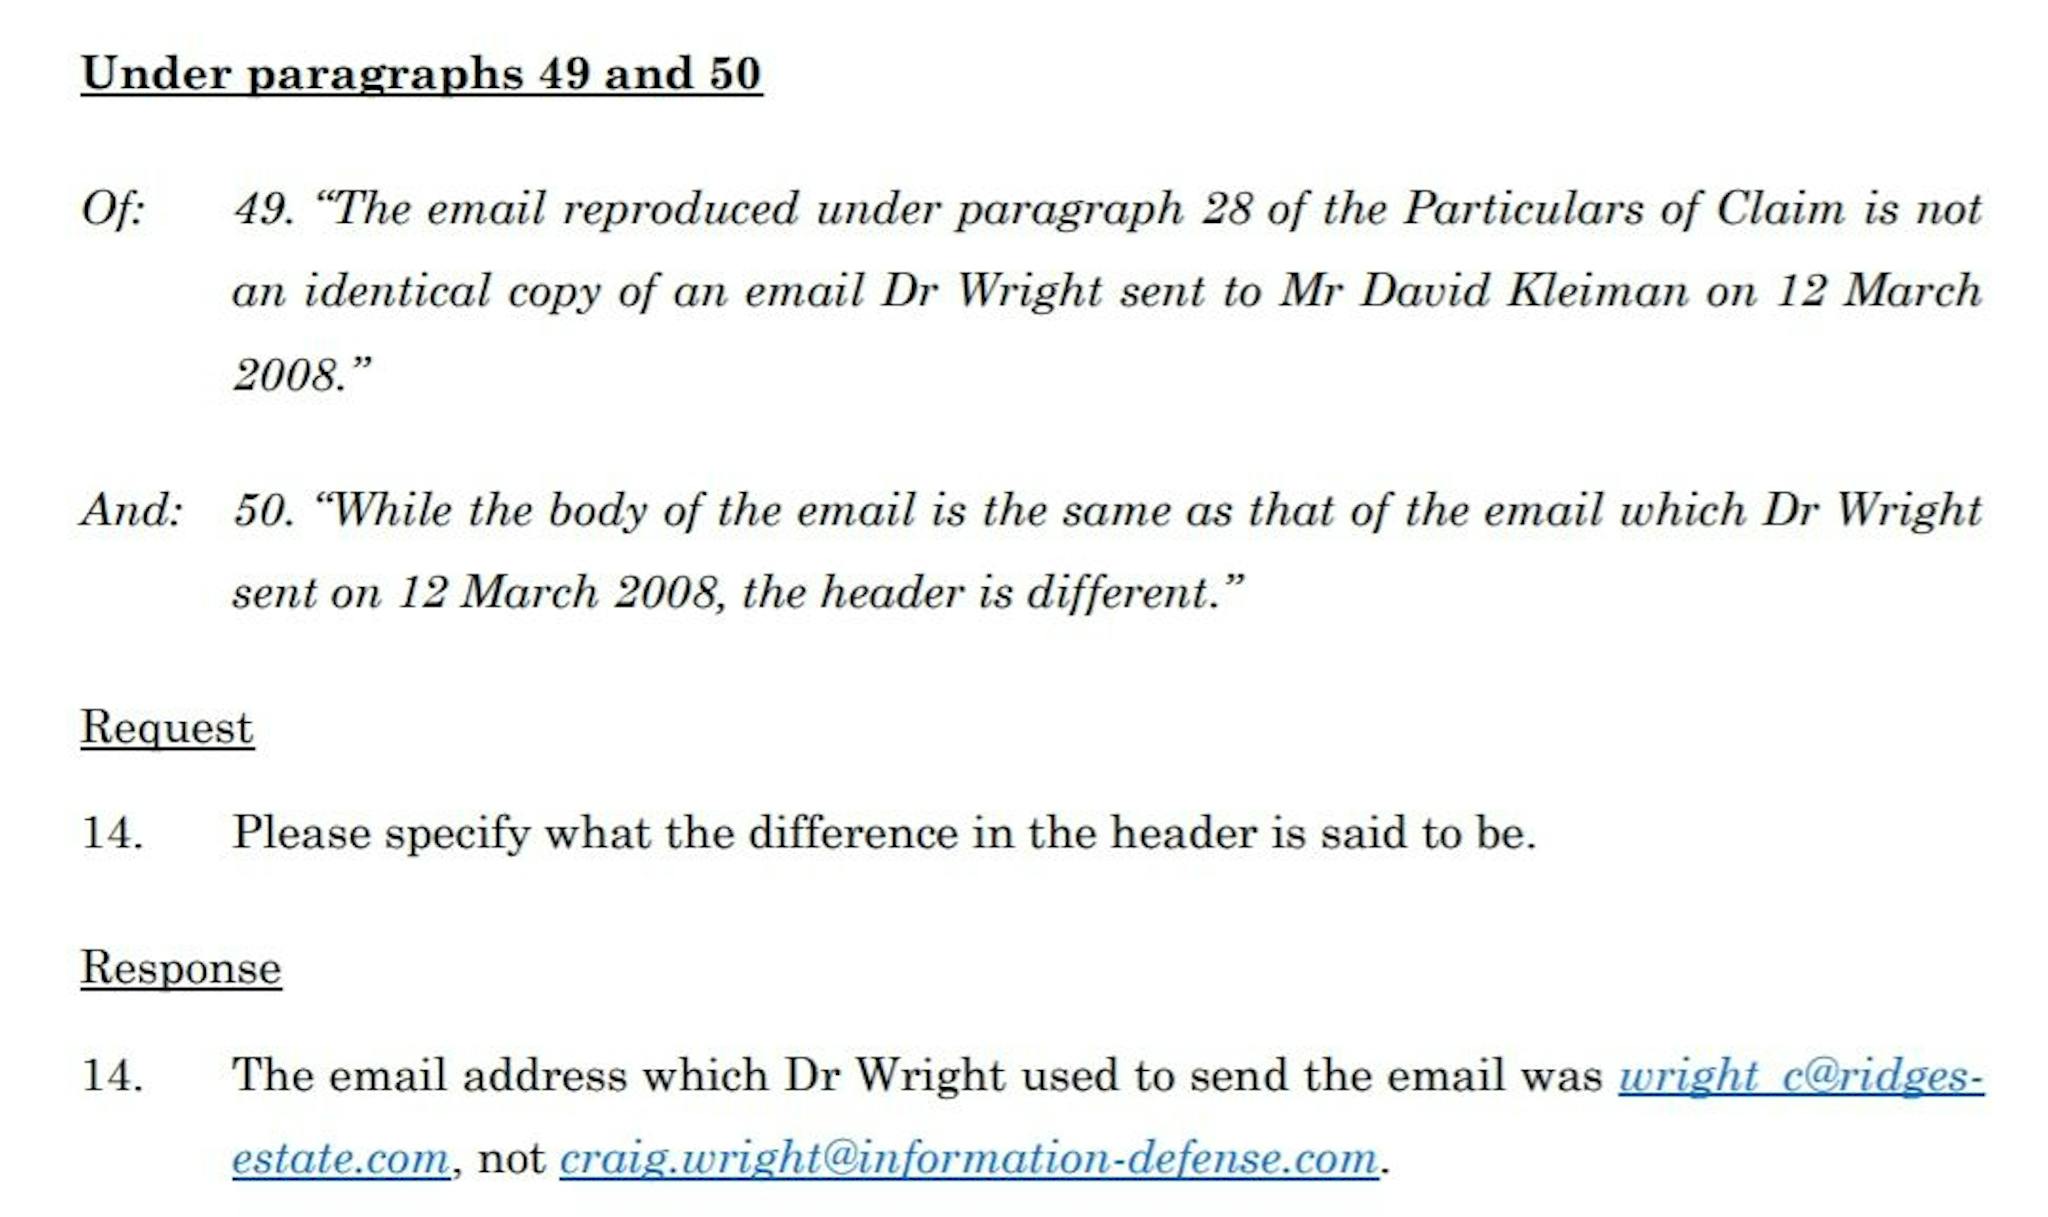 In a September 2021 COPA filing we find Craig Wright claiming the email was sent from ridges-estate.com